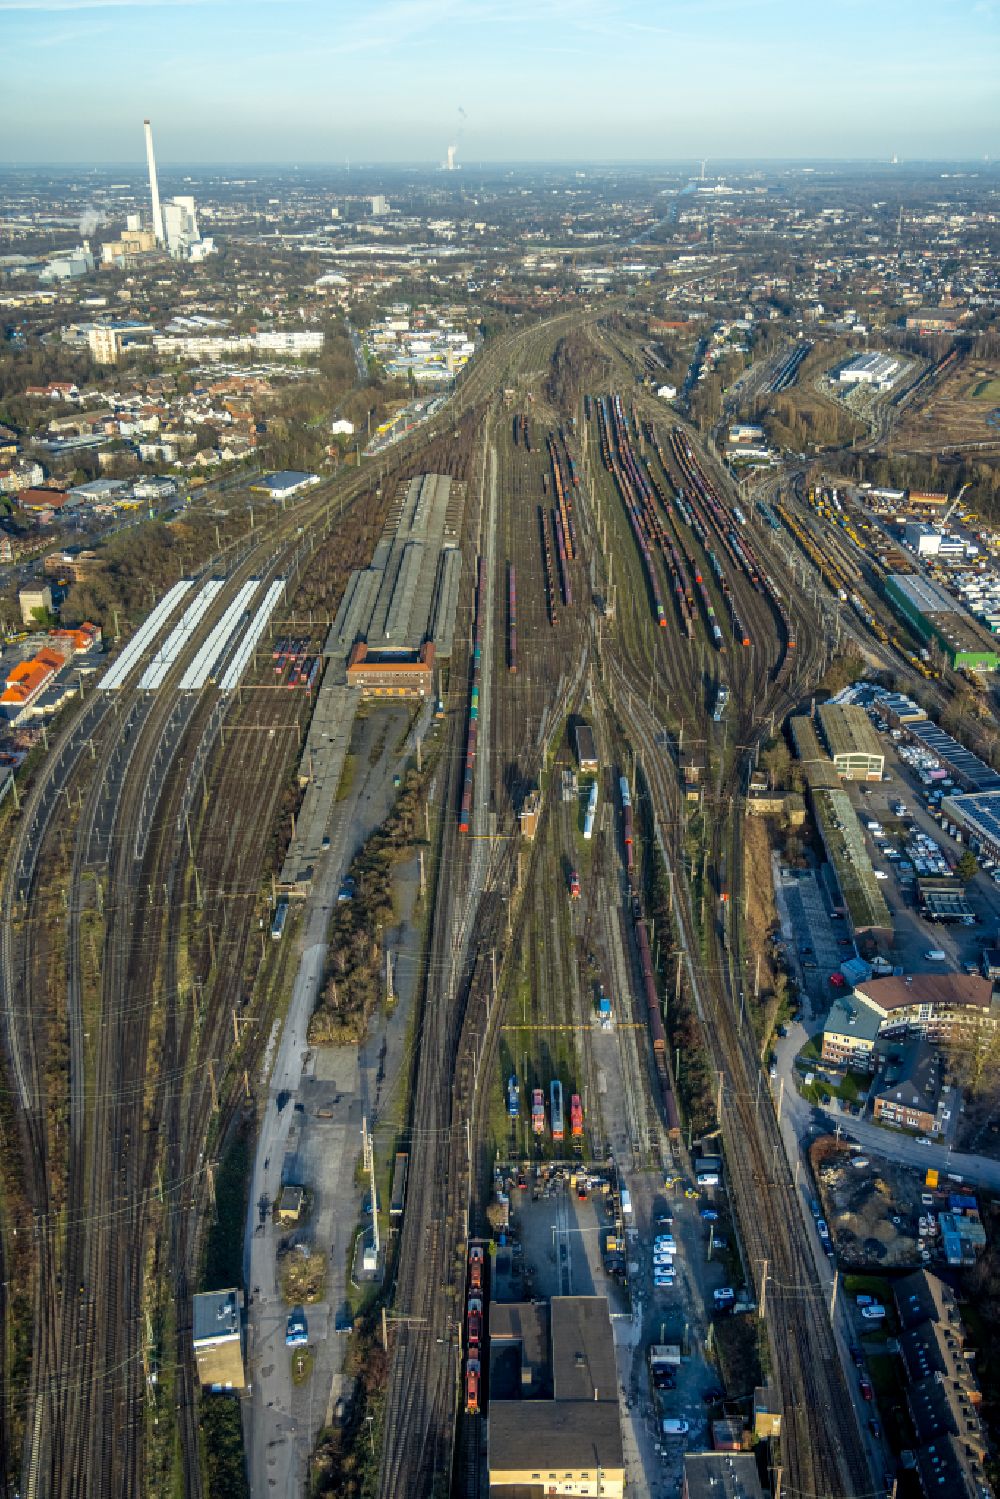 Herne from the bird's eye view: tracks and rails at the Wanne-Eickel main station and the freight yard - marshalling yard of the Deutsche Bahn in Herne in the Ruhr area in the state of North Rhine-Westphalia